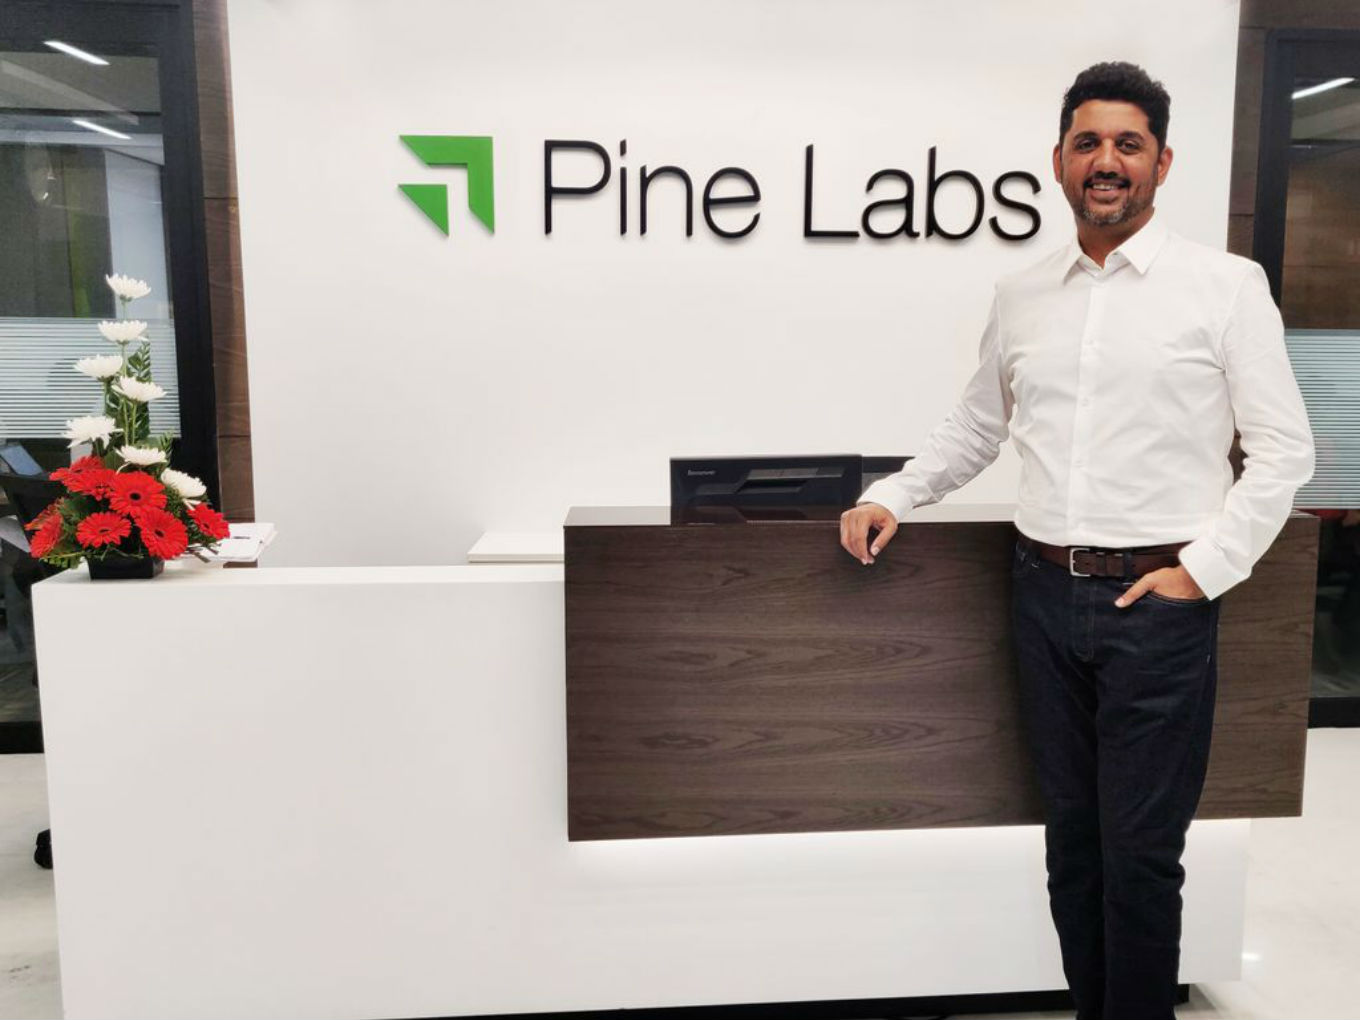 Citrus Pay Founder Amrish Rau Joins Pine Labs As CEO